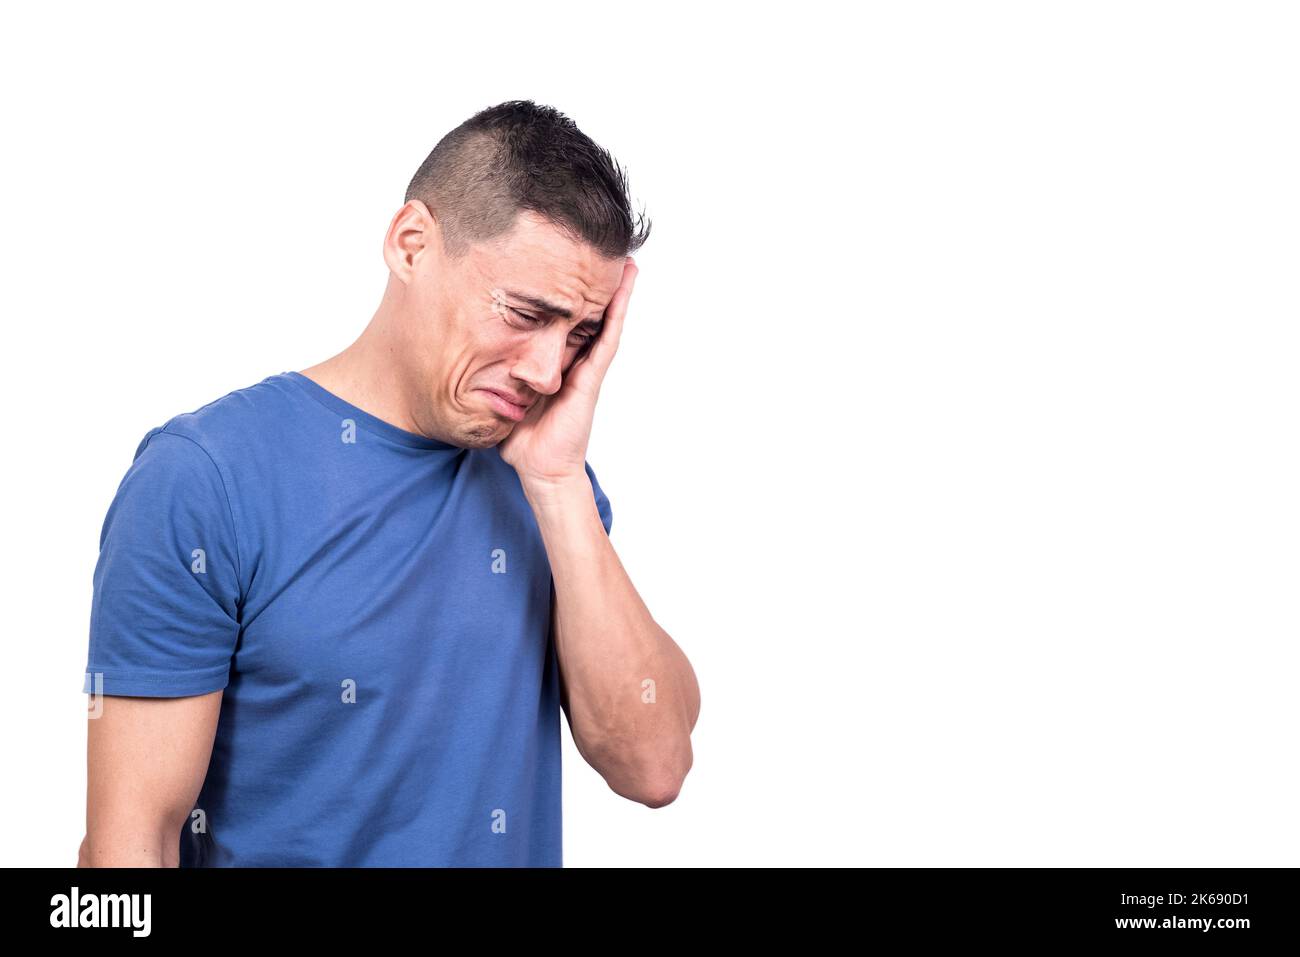 Sad man crying while touching the face with hand Stock Photo